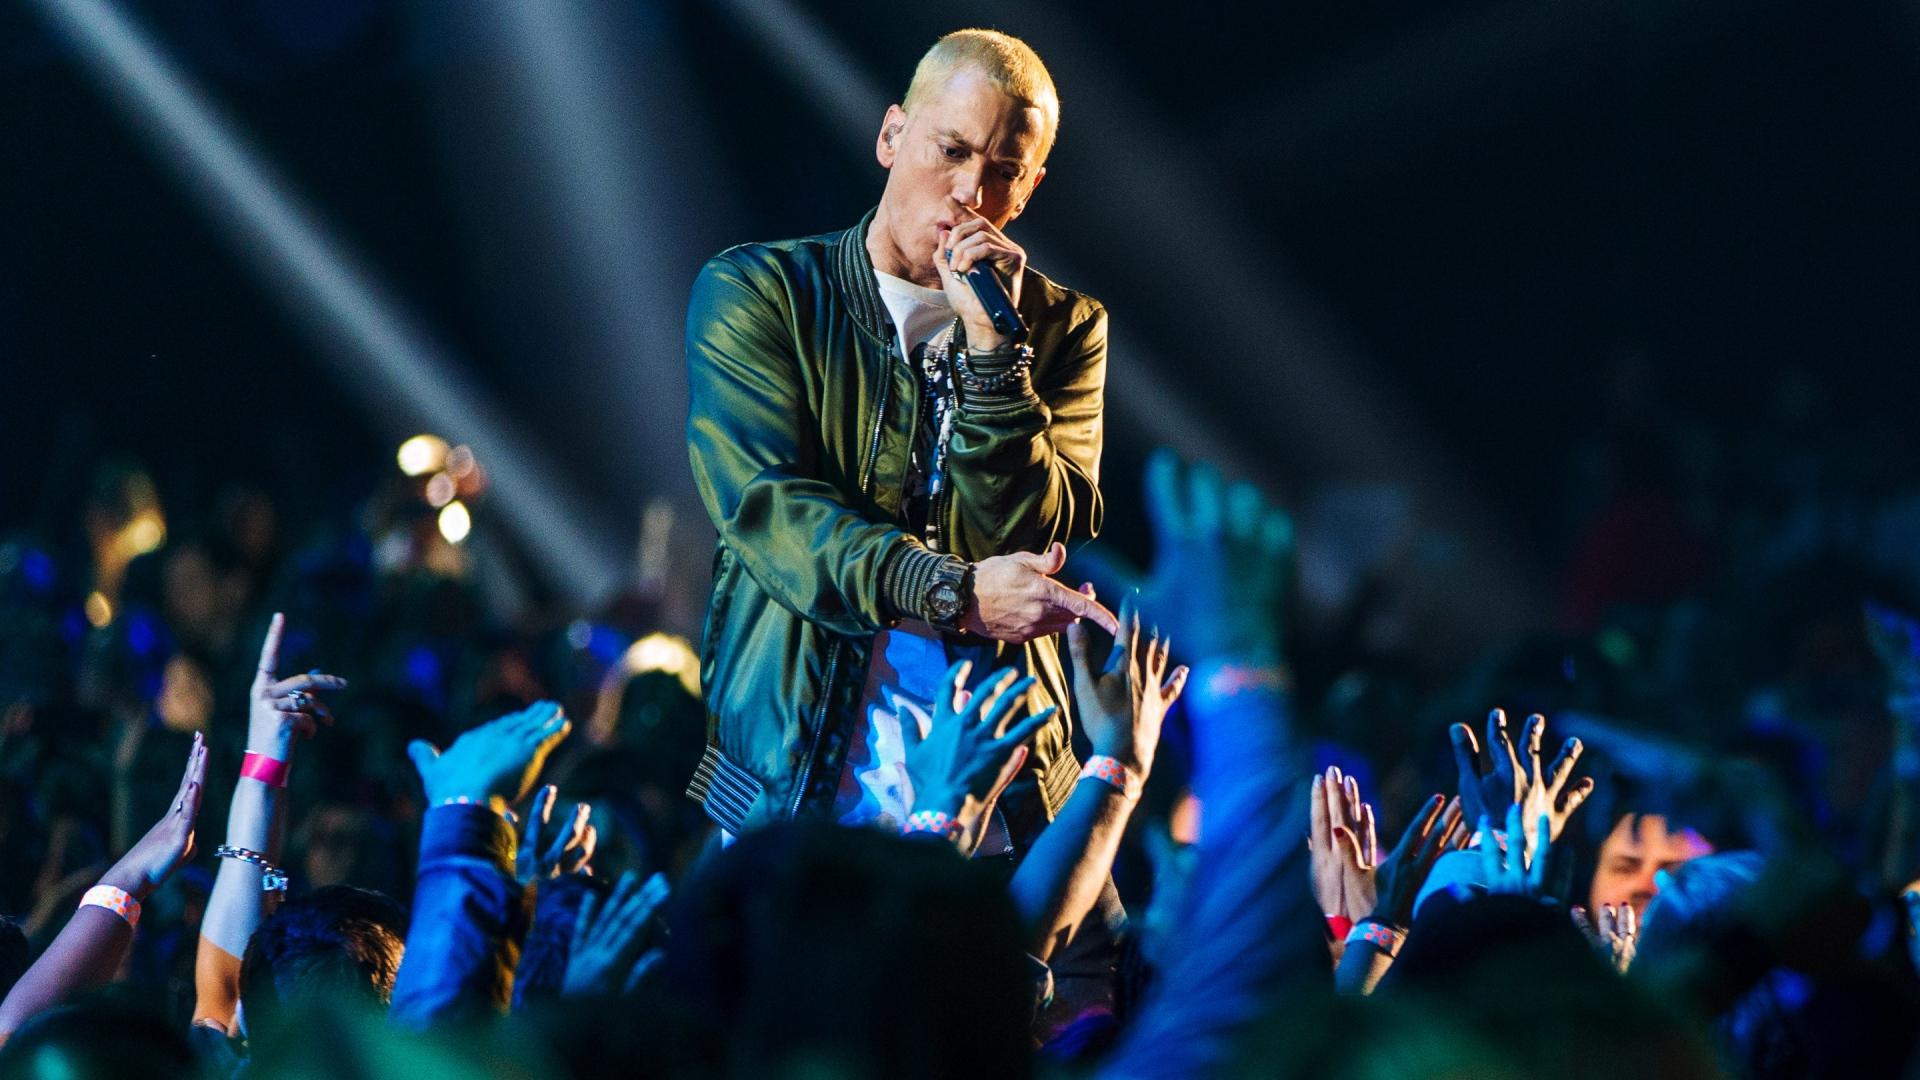 When is Eminem's "Fortnite" concert and how to watch it